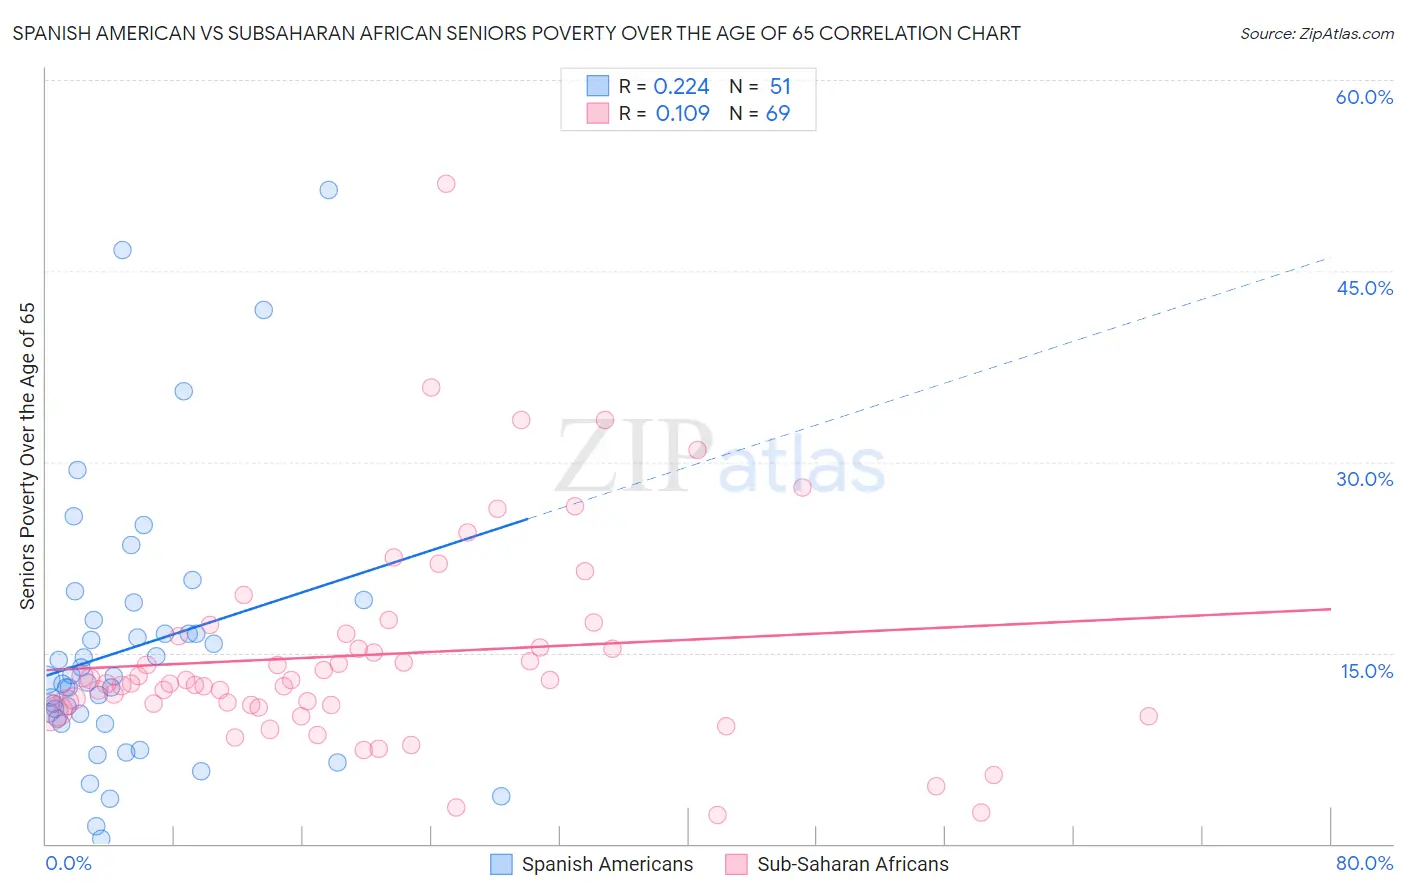 Spanish American vs Subsaharan African Seniors Poverty Over the Age of 65